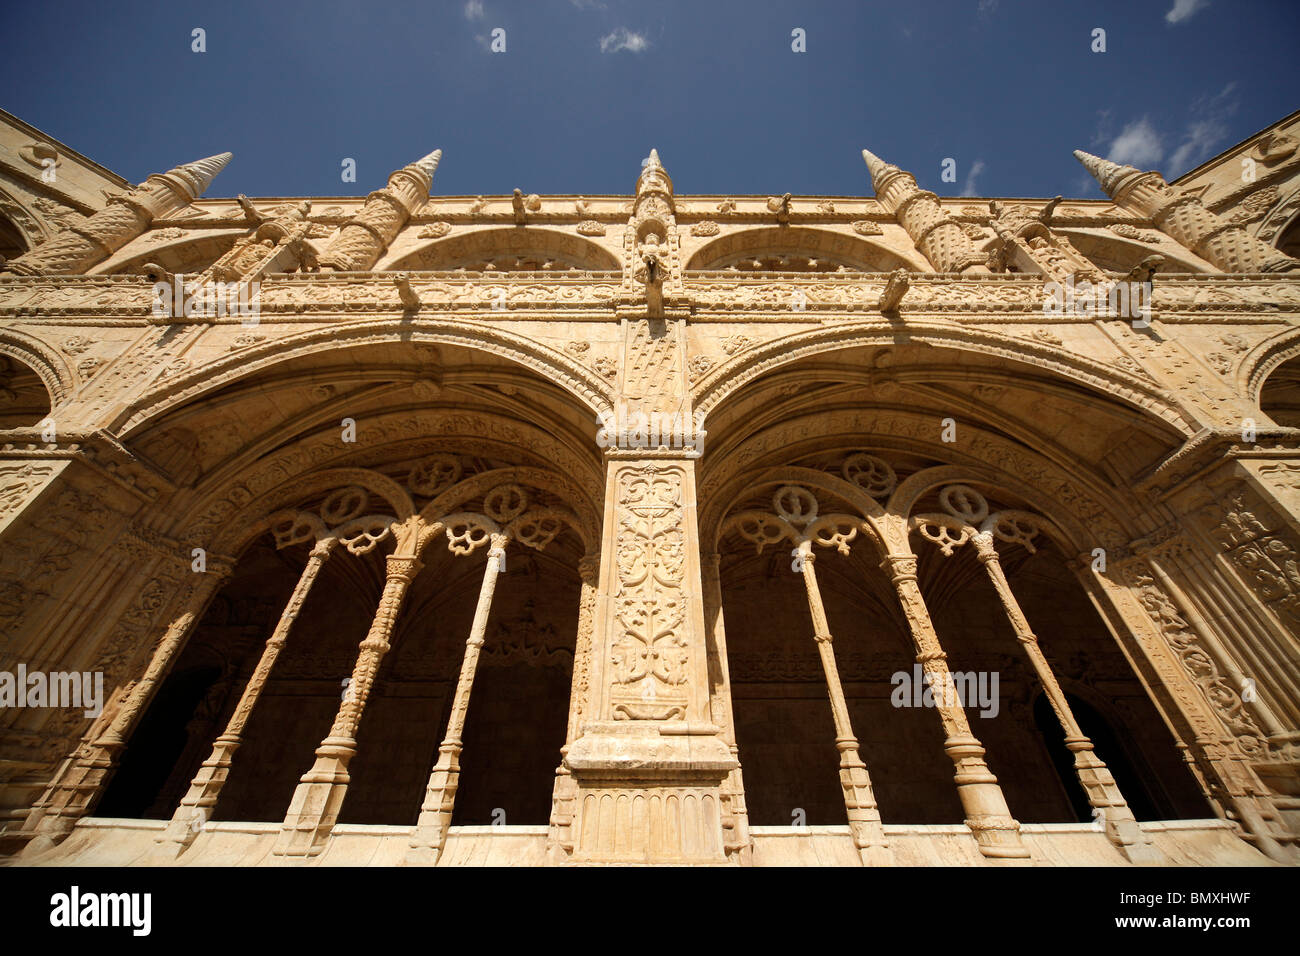 decorated two-storey cloisters and courtyard of Jeronimos Monastery Mosteiro dos Jerominos in Belem, Lisbon, Portugal, Europe Stock Photo